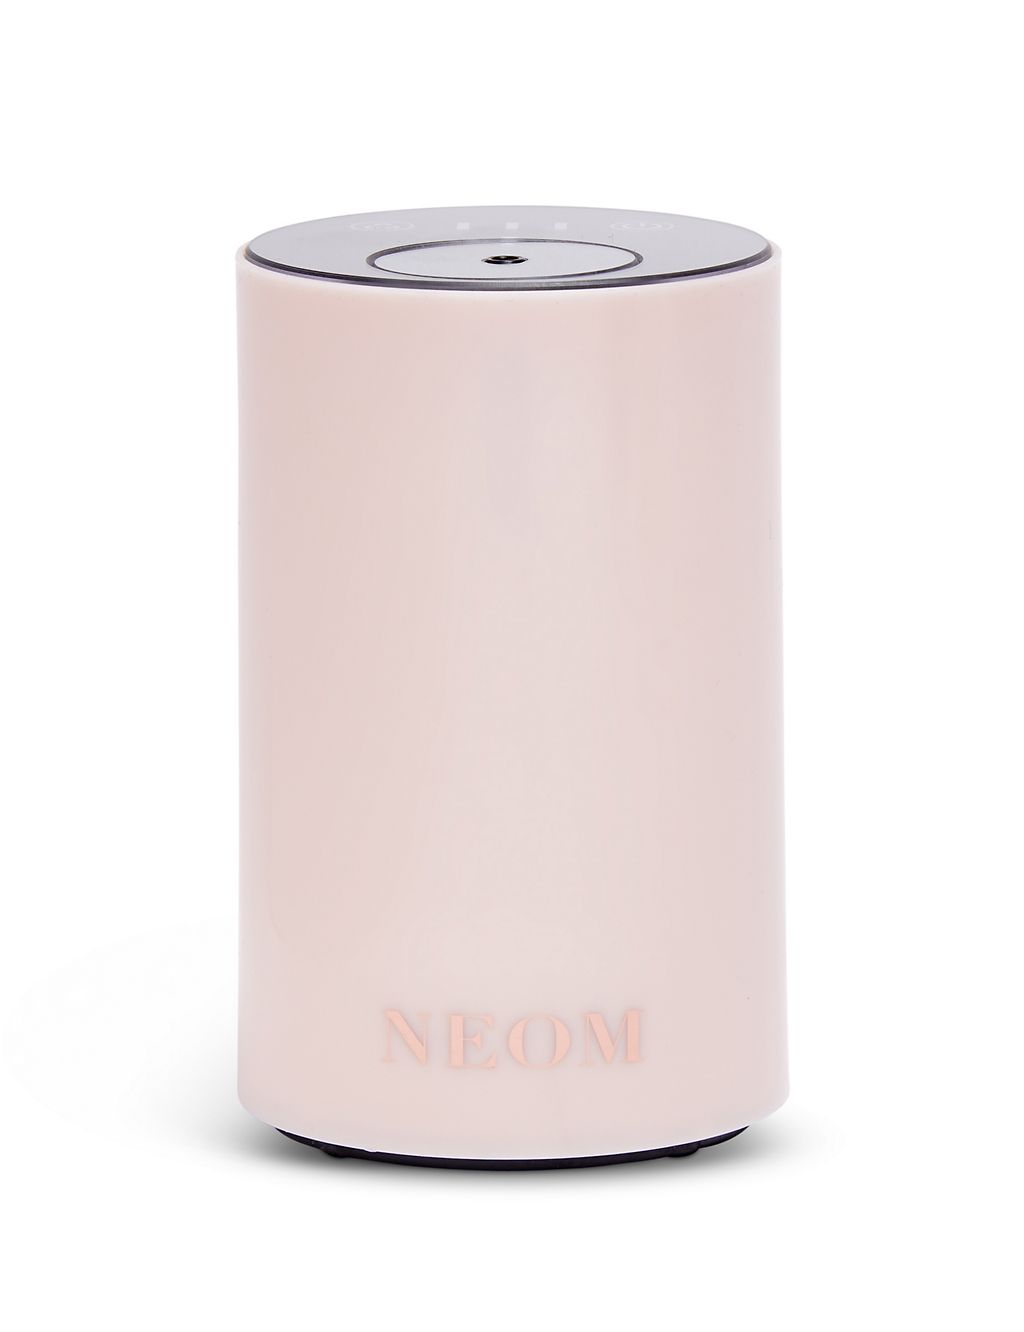 Wellbeing Pod Mini - Essential Oil Diffuser 350g 3 of 6